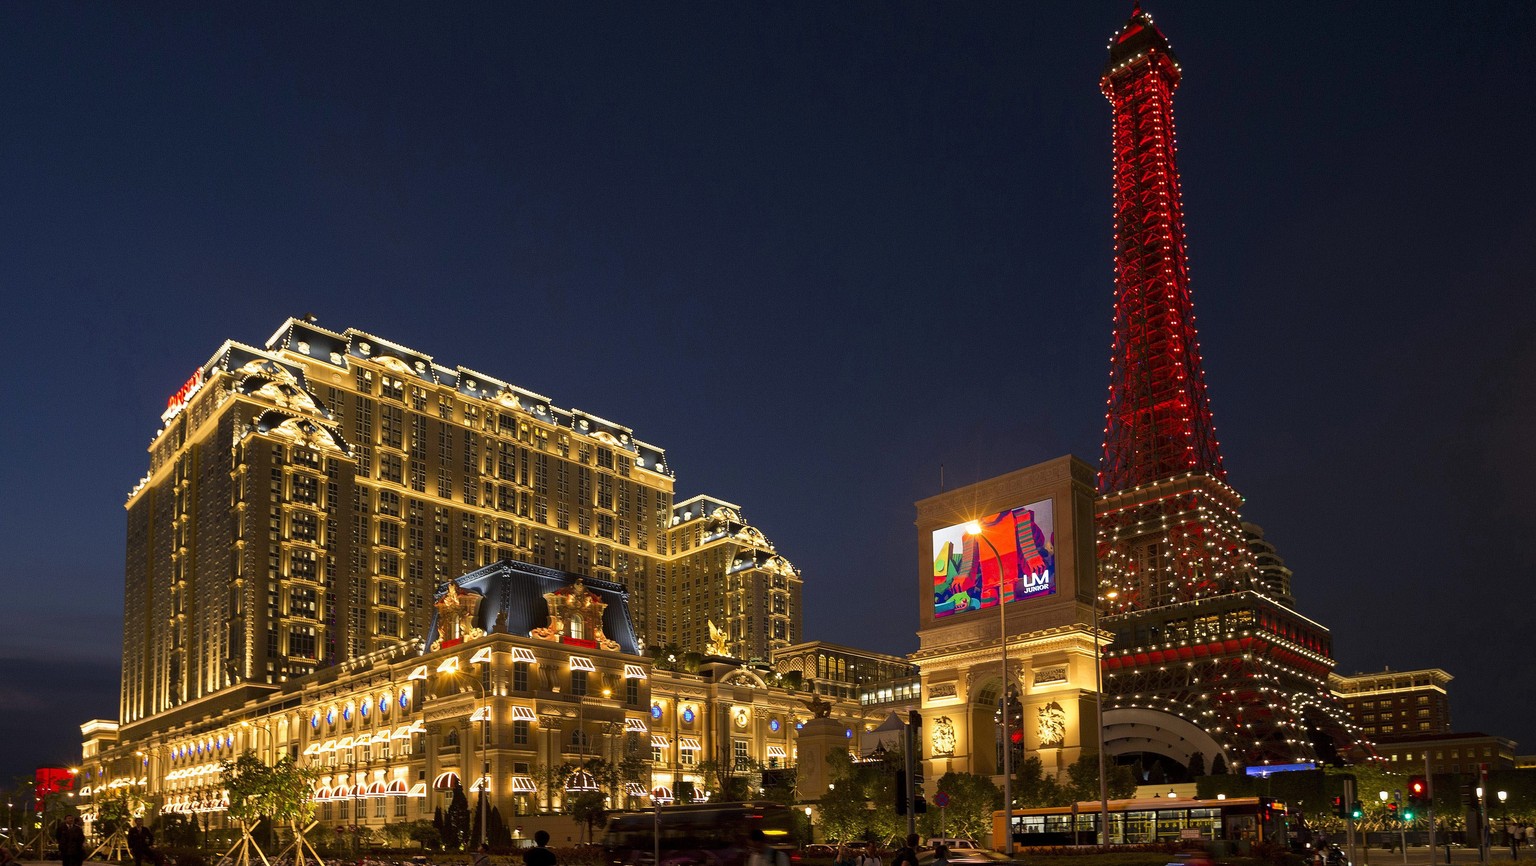 epa05537848 The new luxury hotel resort 'Parisian', owned by American casino magnate Sheldon Adelson, illuminated as it opens in Macao, China, 13 September 2016. The new hotel resort inspired by Paris ...